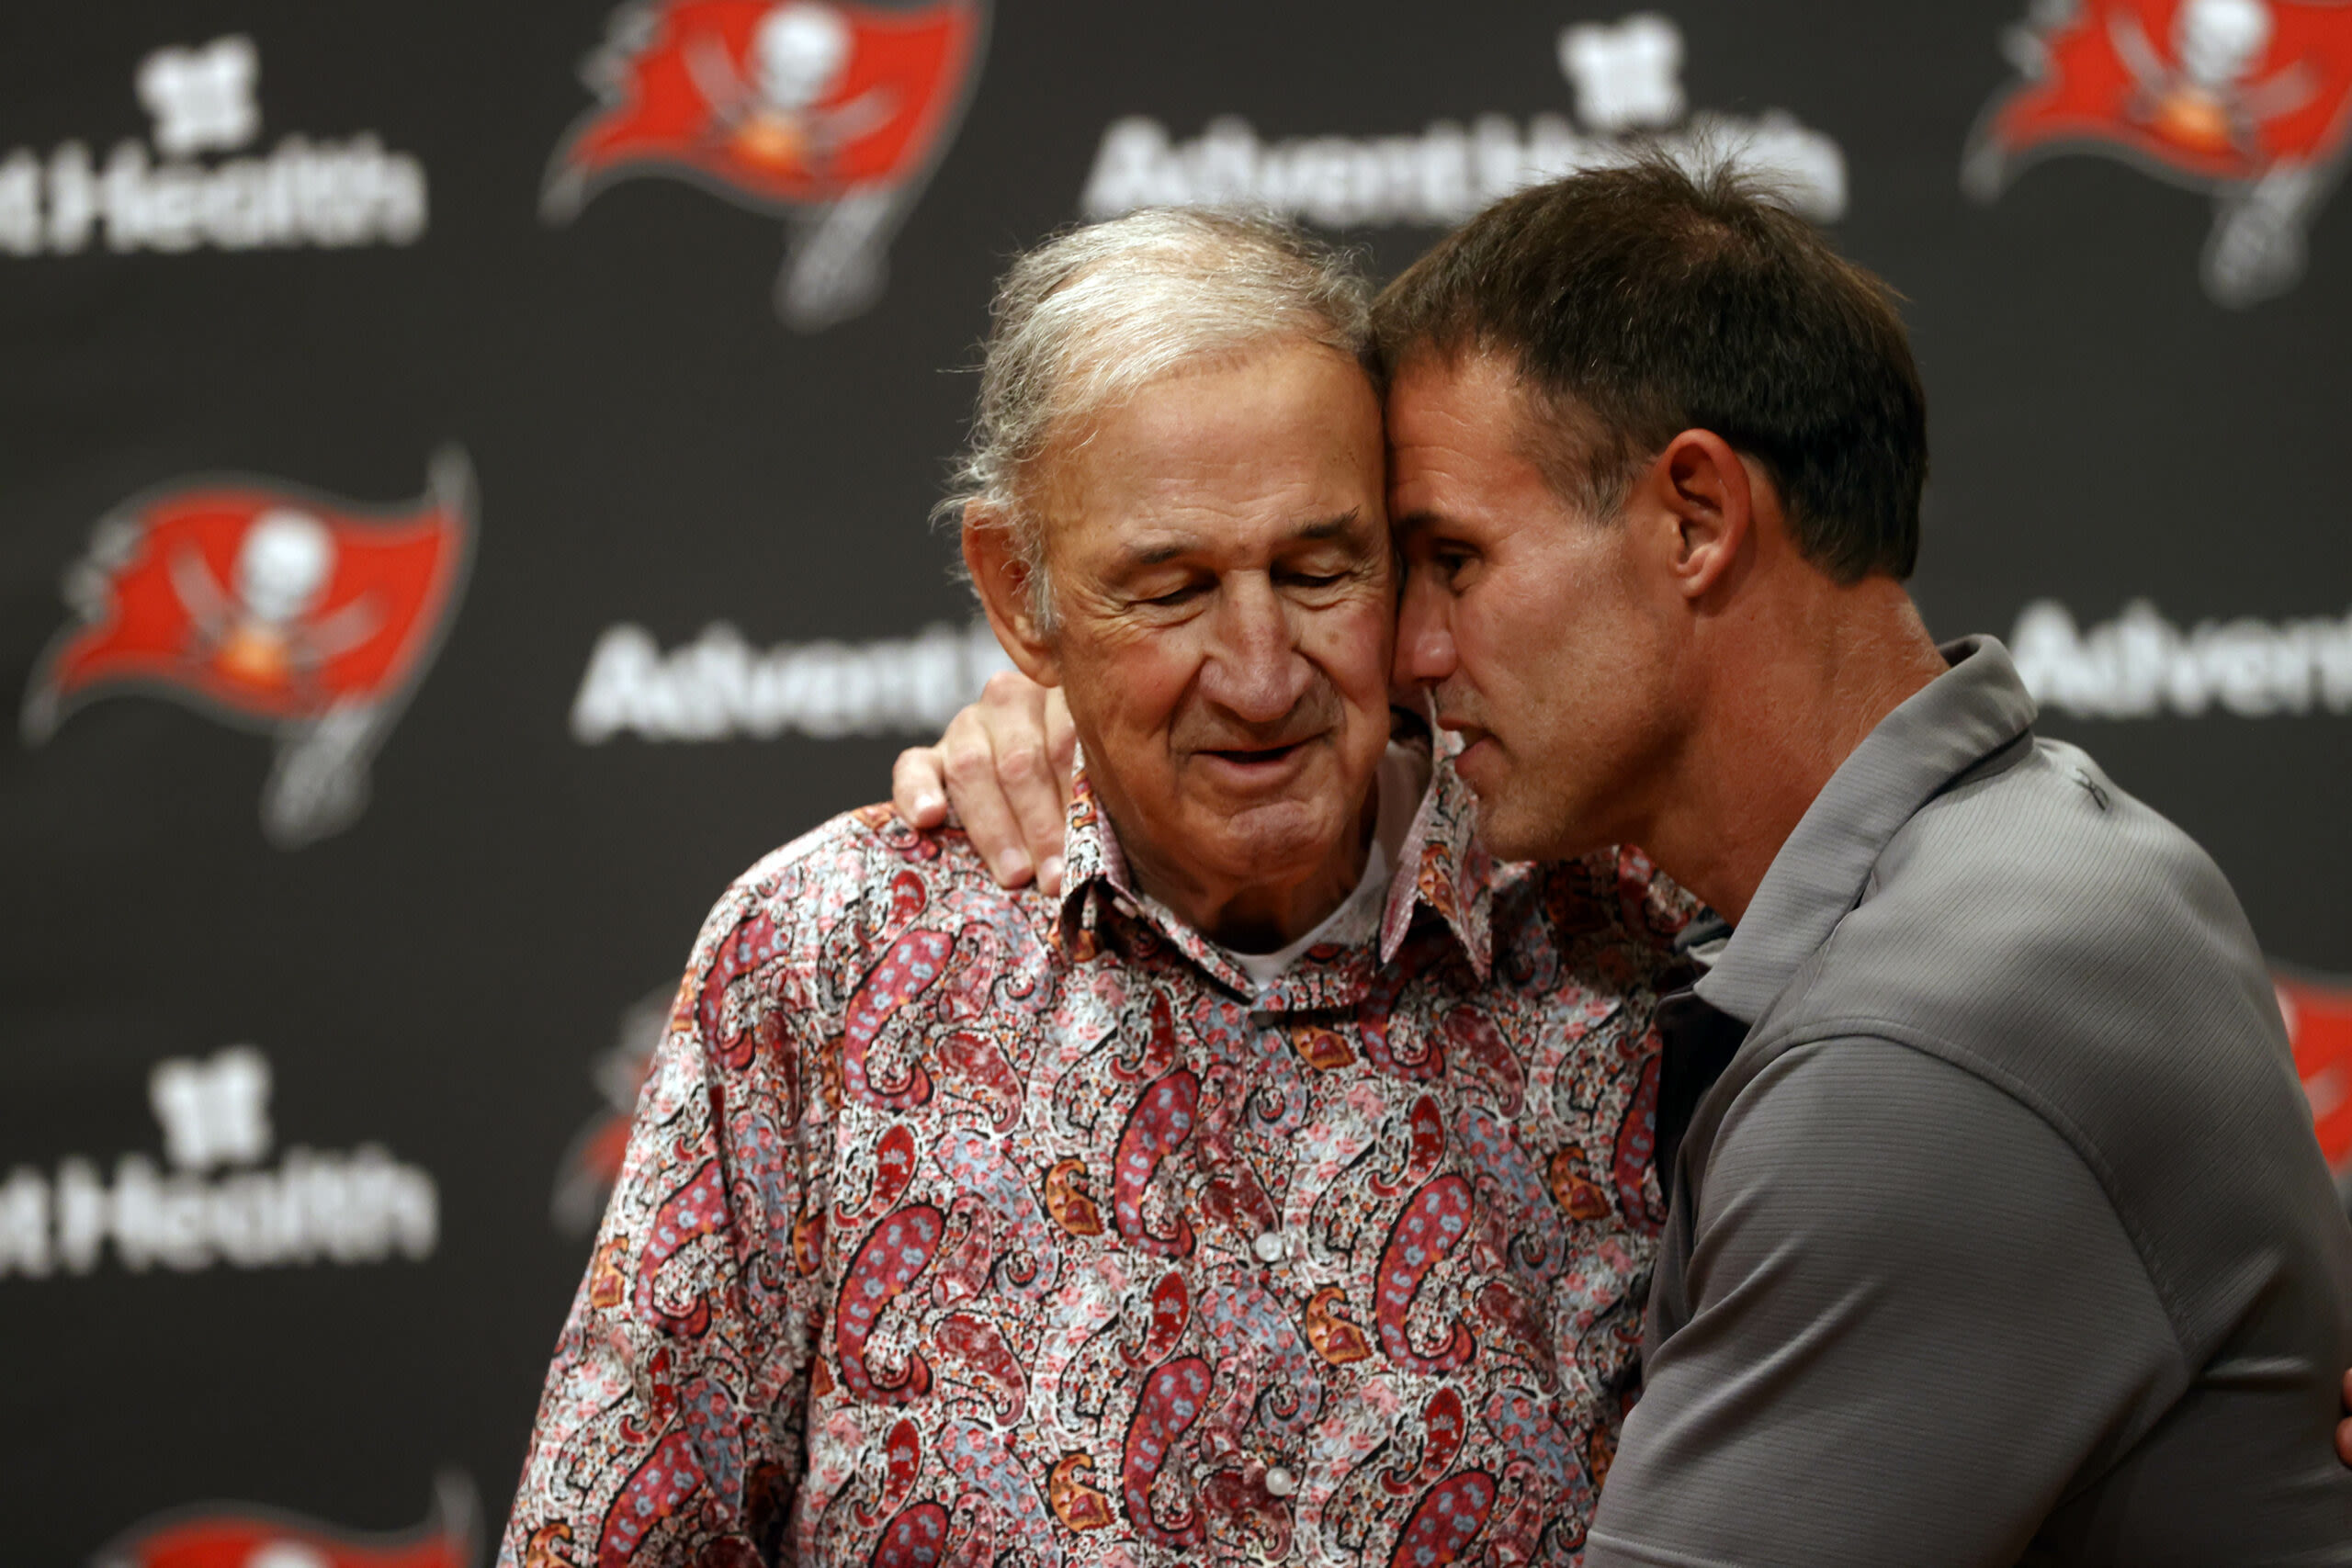 The football world continues to pay tribute to Monte Kiffin